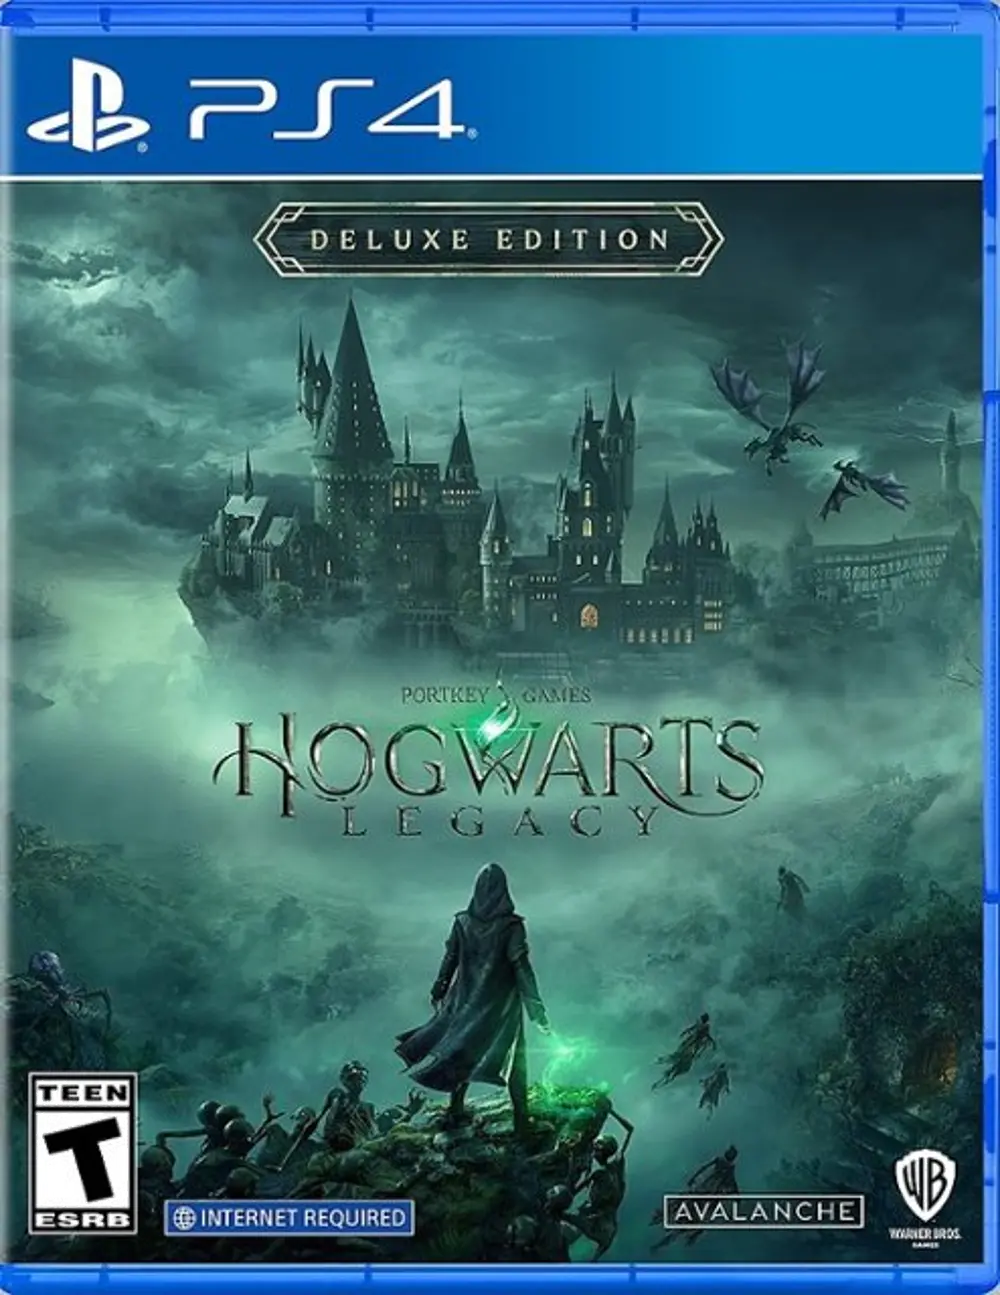 PS4 WAR 79499 Hogwarts Legacy Deluxe Edition - PS4-1